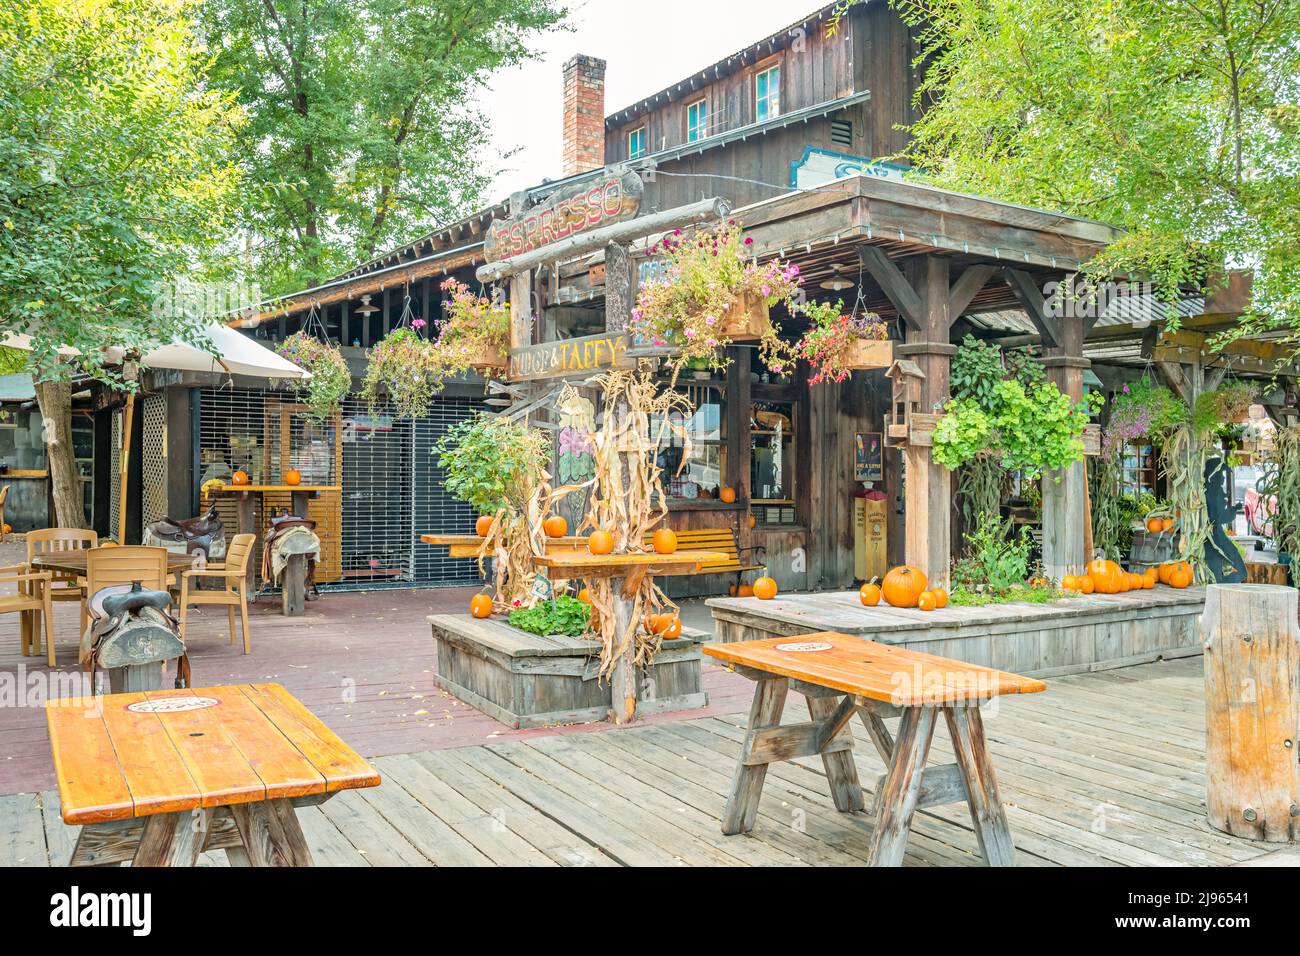 Restaurant Patio in the town of Winthrop Washington State USA Stock Photo